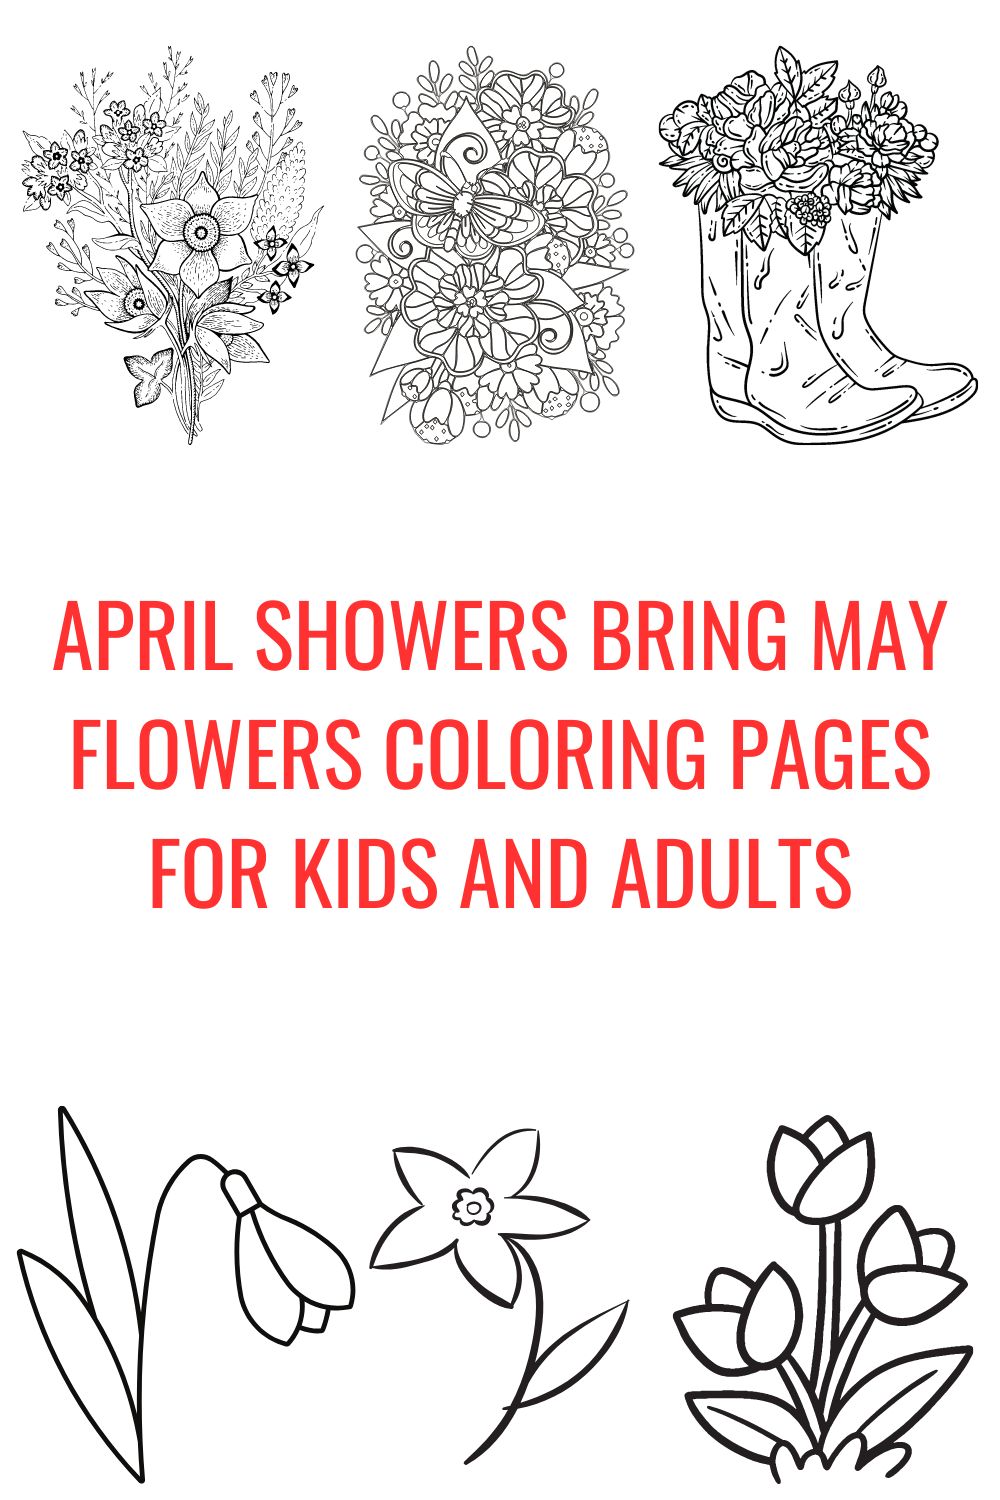 April showers bring May flowers coloring pages for kids and adults.